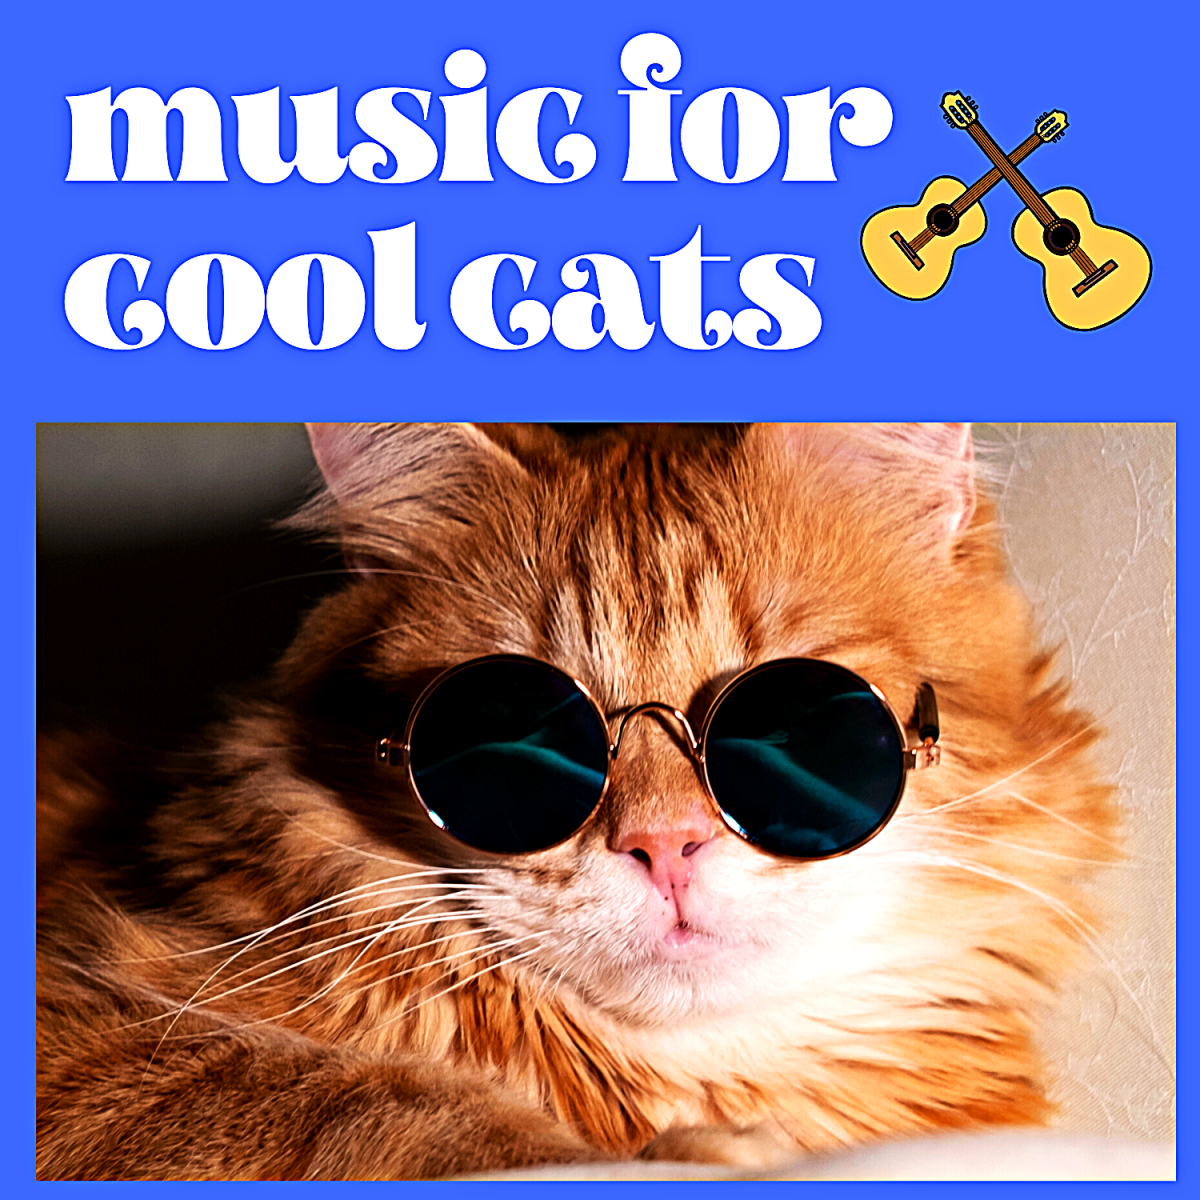 What's your favorite song with "cat" in the title? Did it make the list???